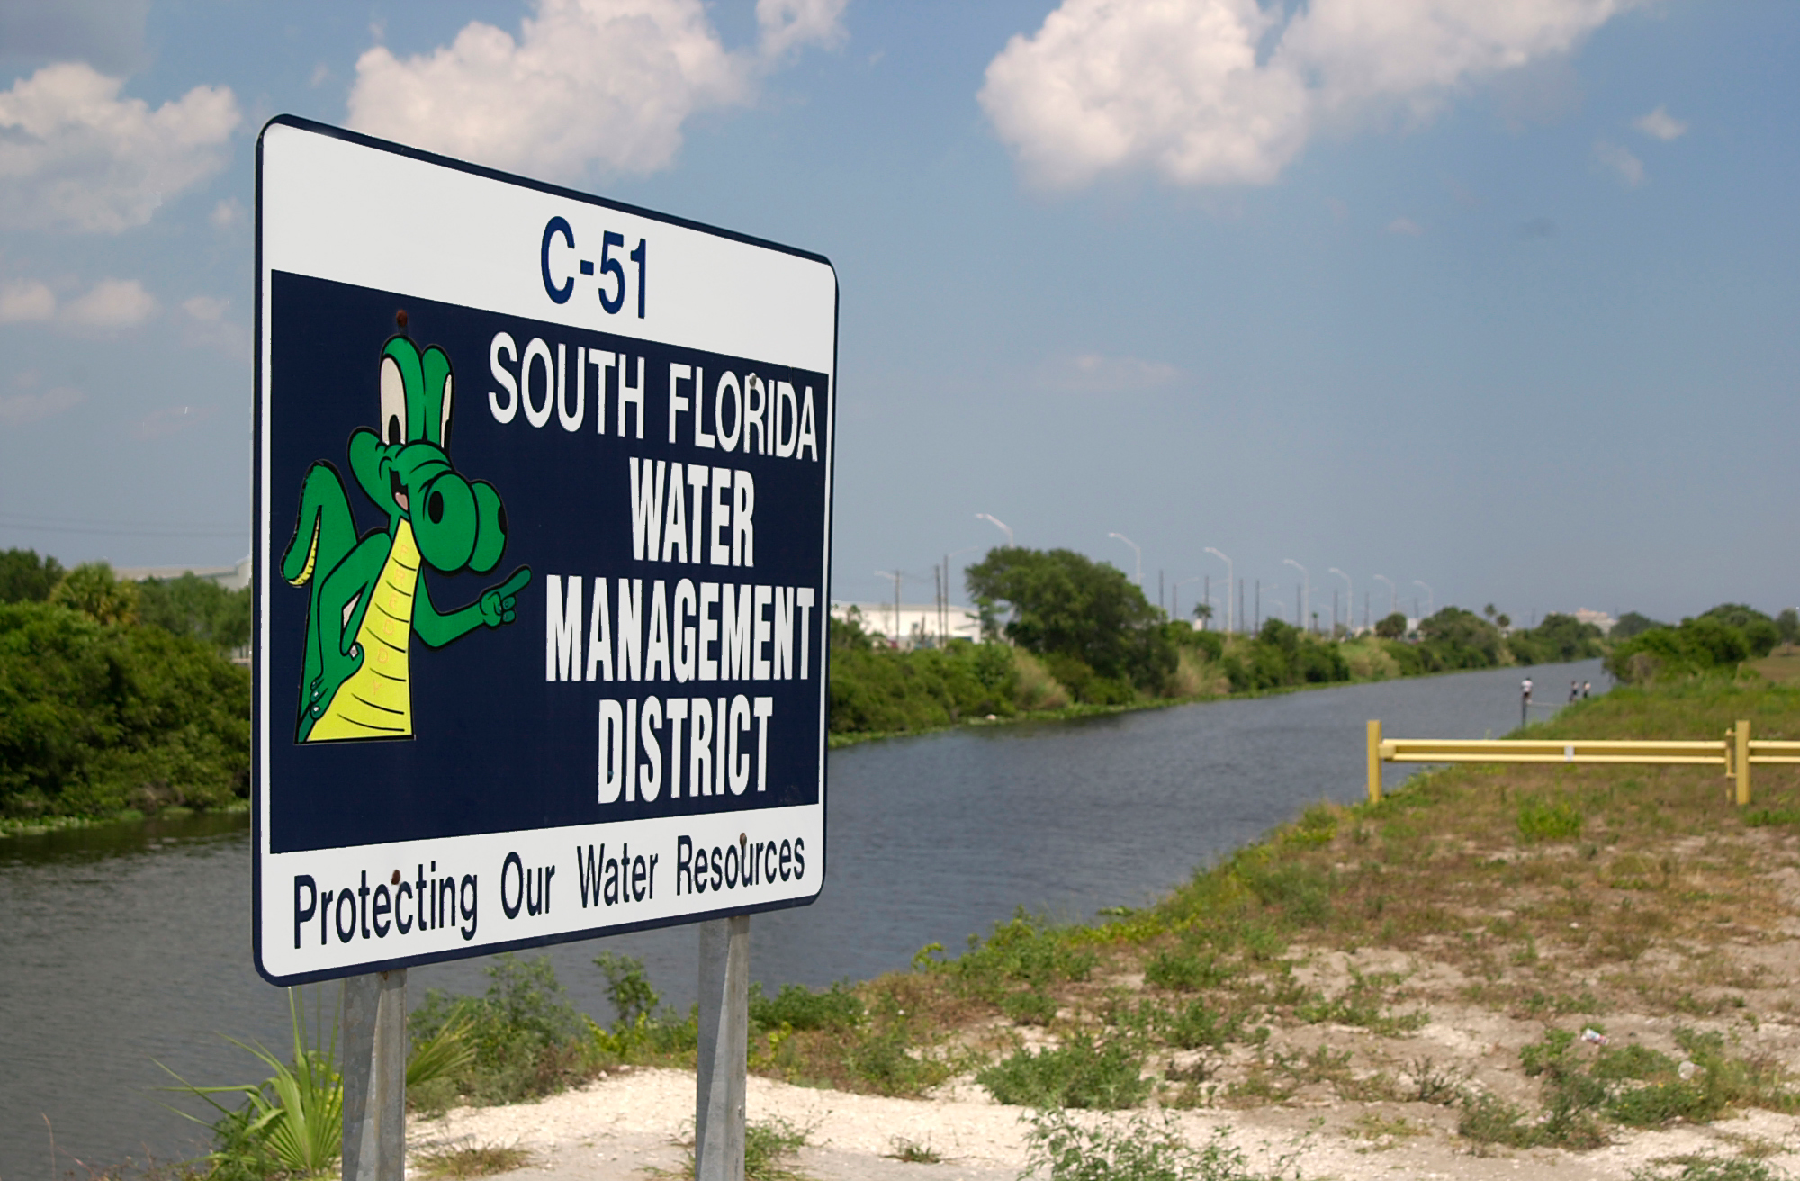 Sign for the South Florida Water Management District, taken by government image